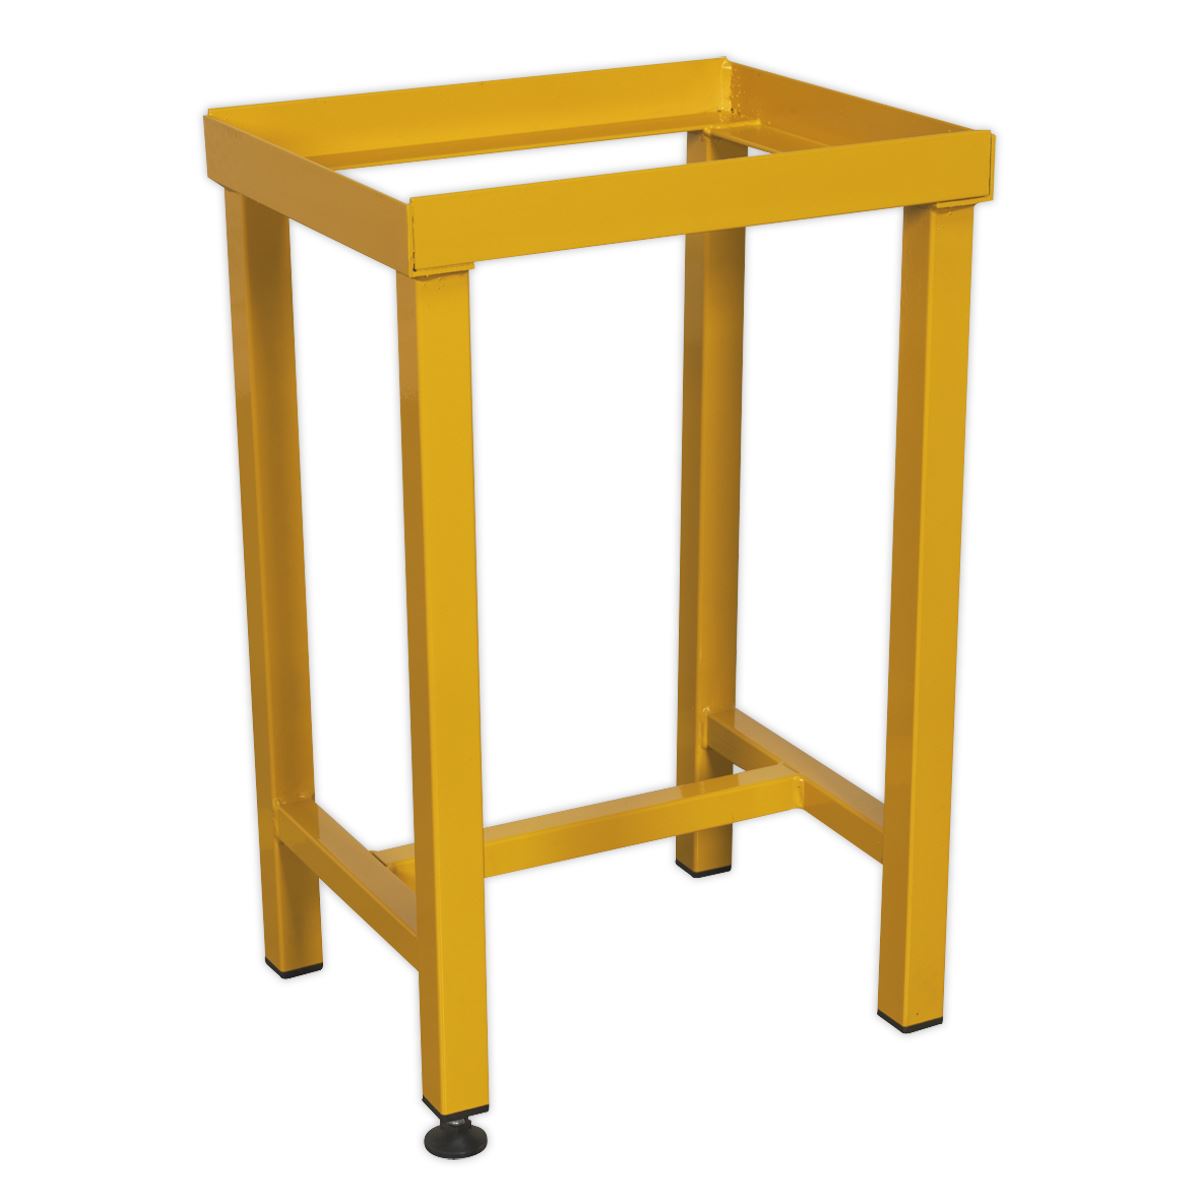 Sealey Floor Stand for FSC06